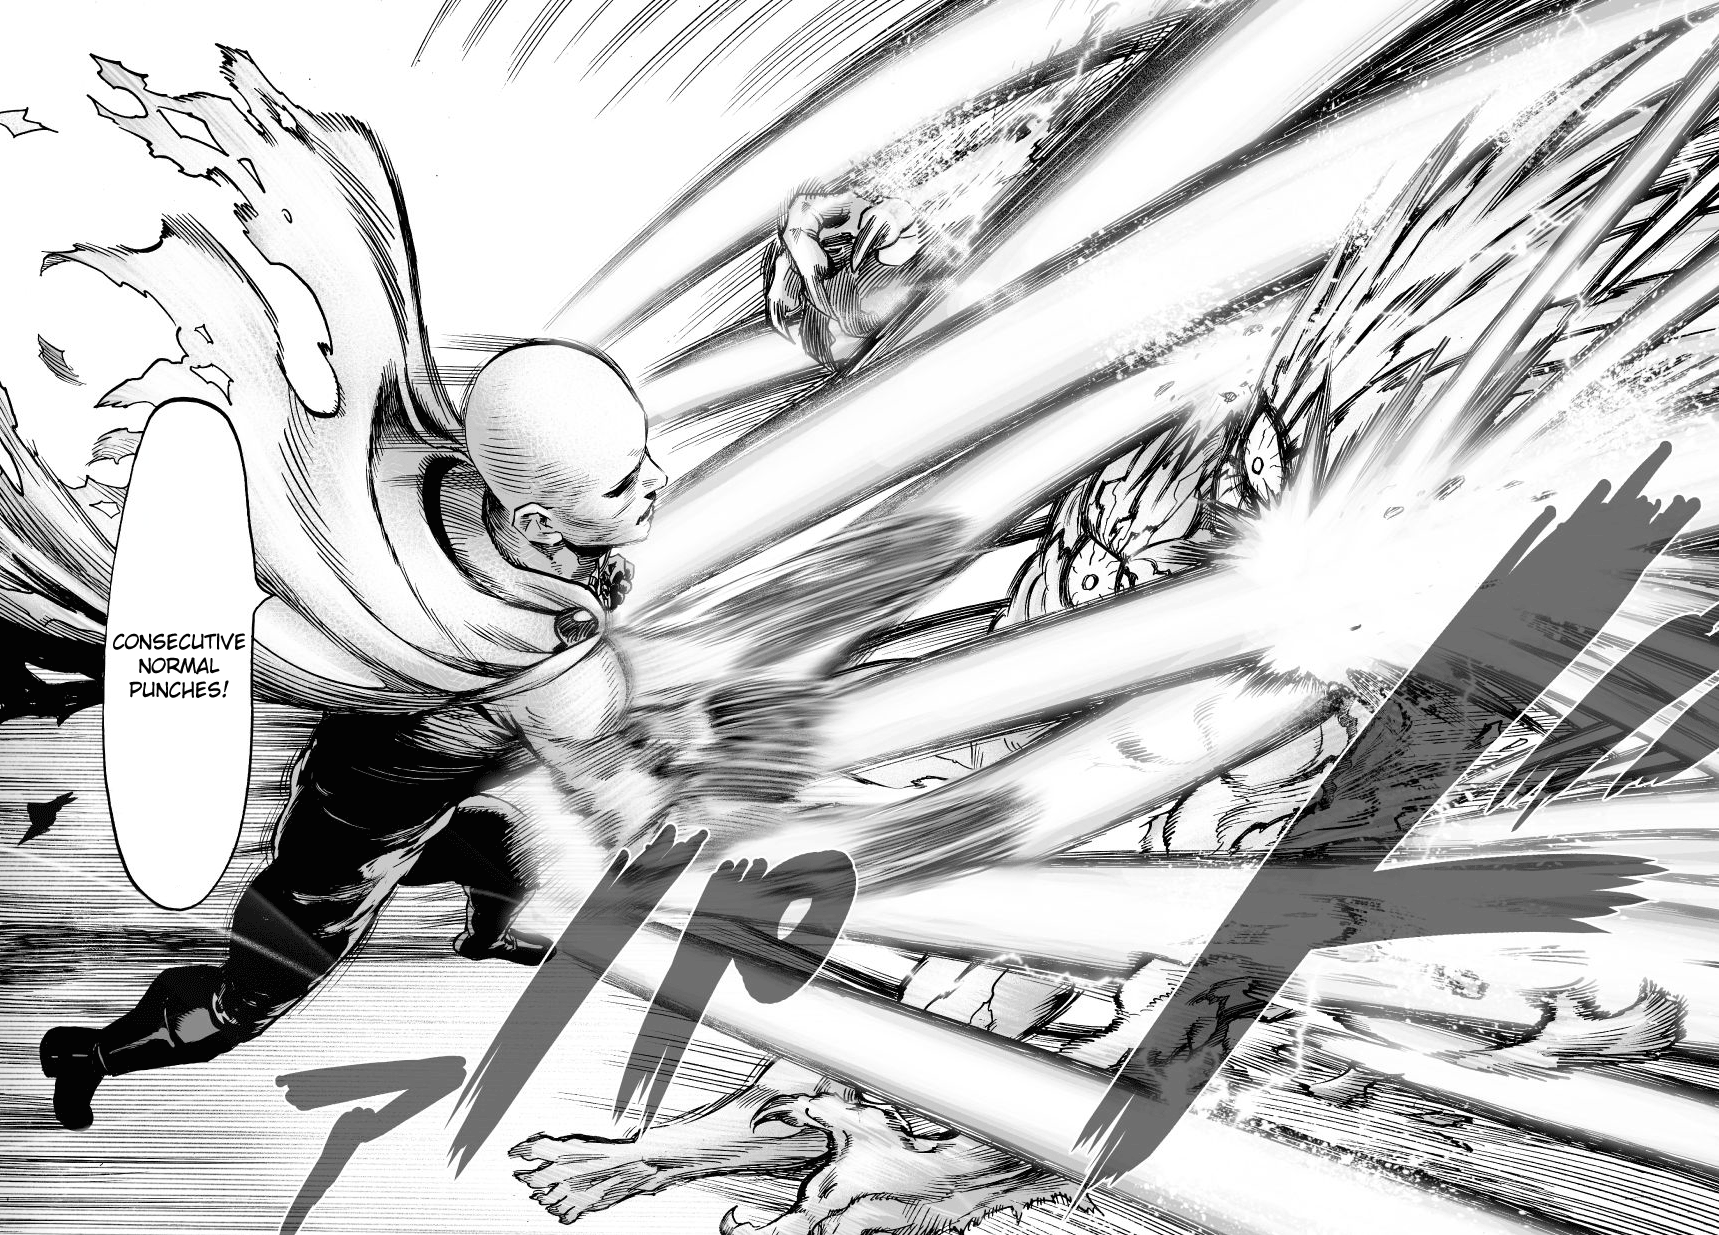 One Punch Man, Chapter 36 - Boros